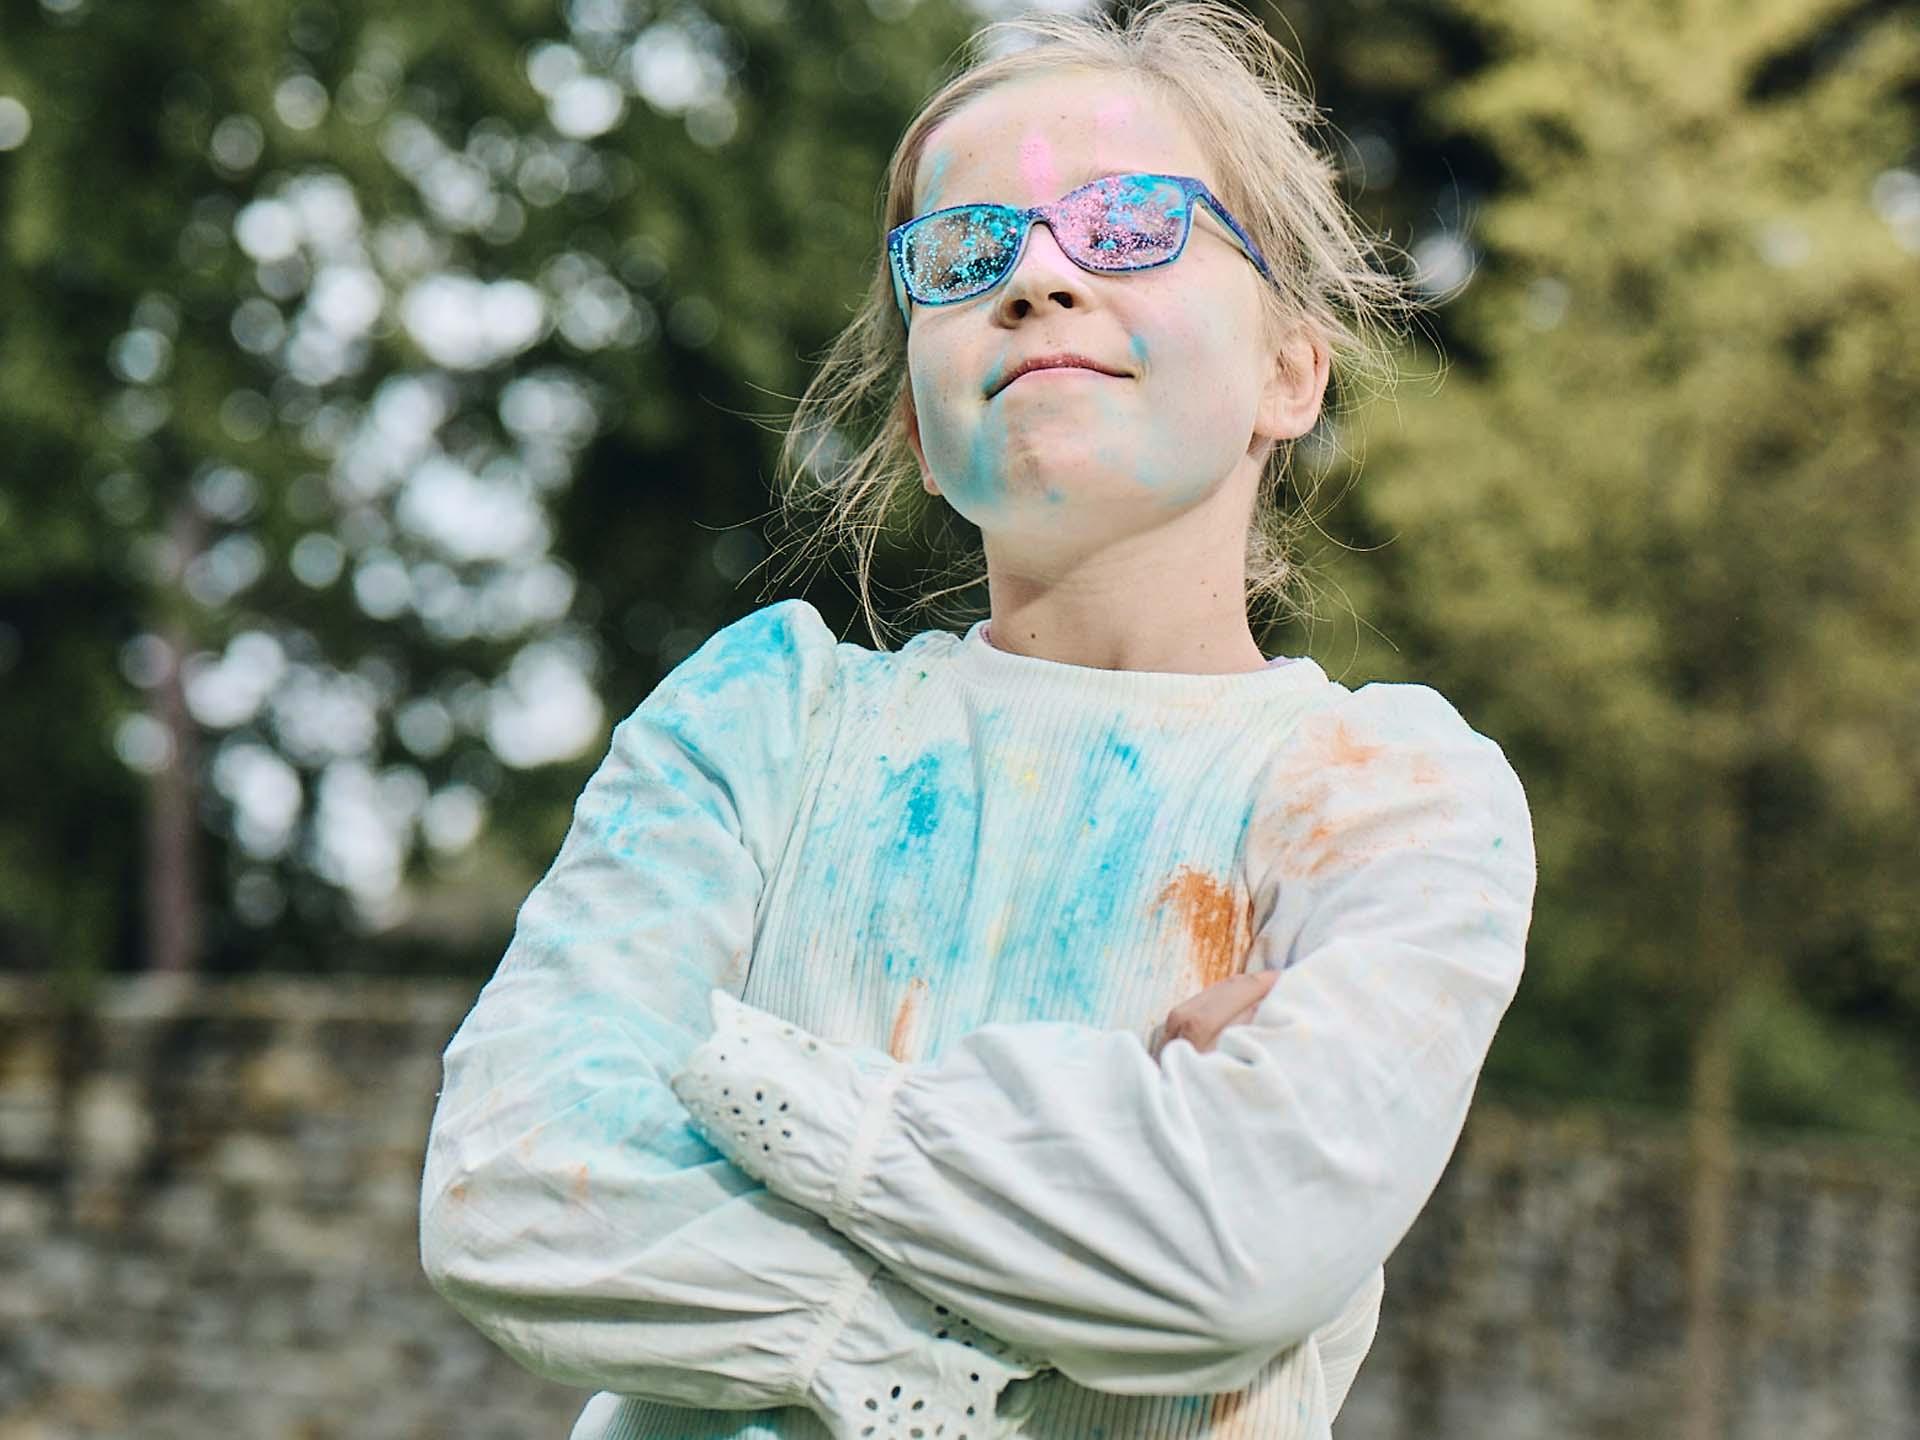 A girl with crossed arms and dirty glasses from playing with colored powder looks defiant and grins.